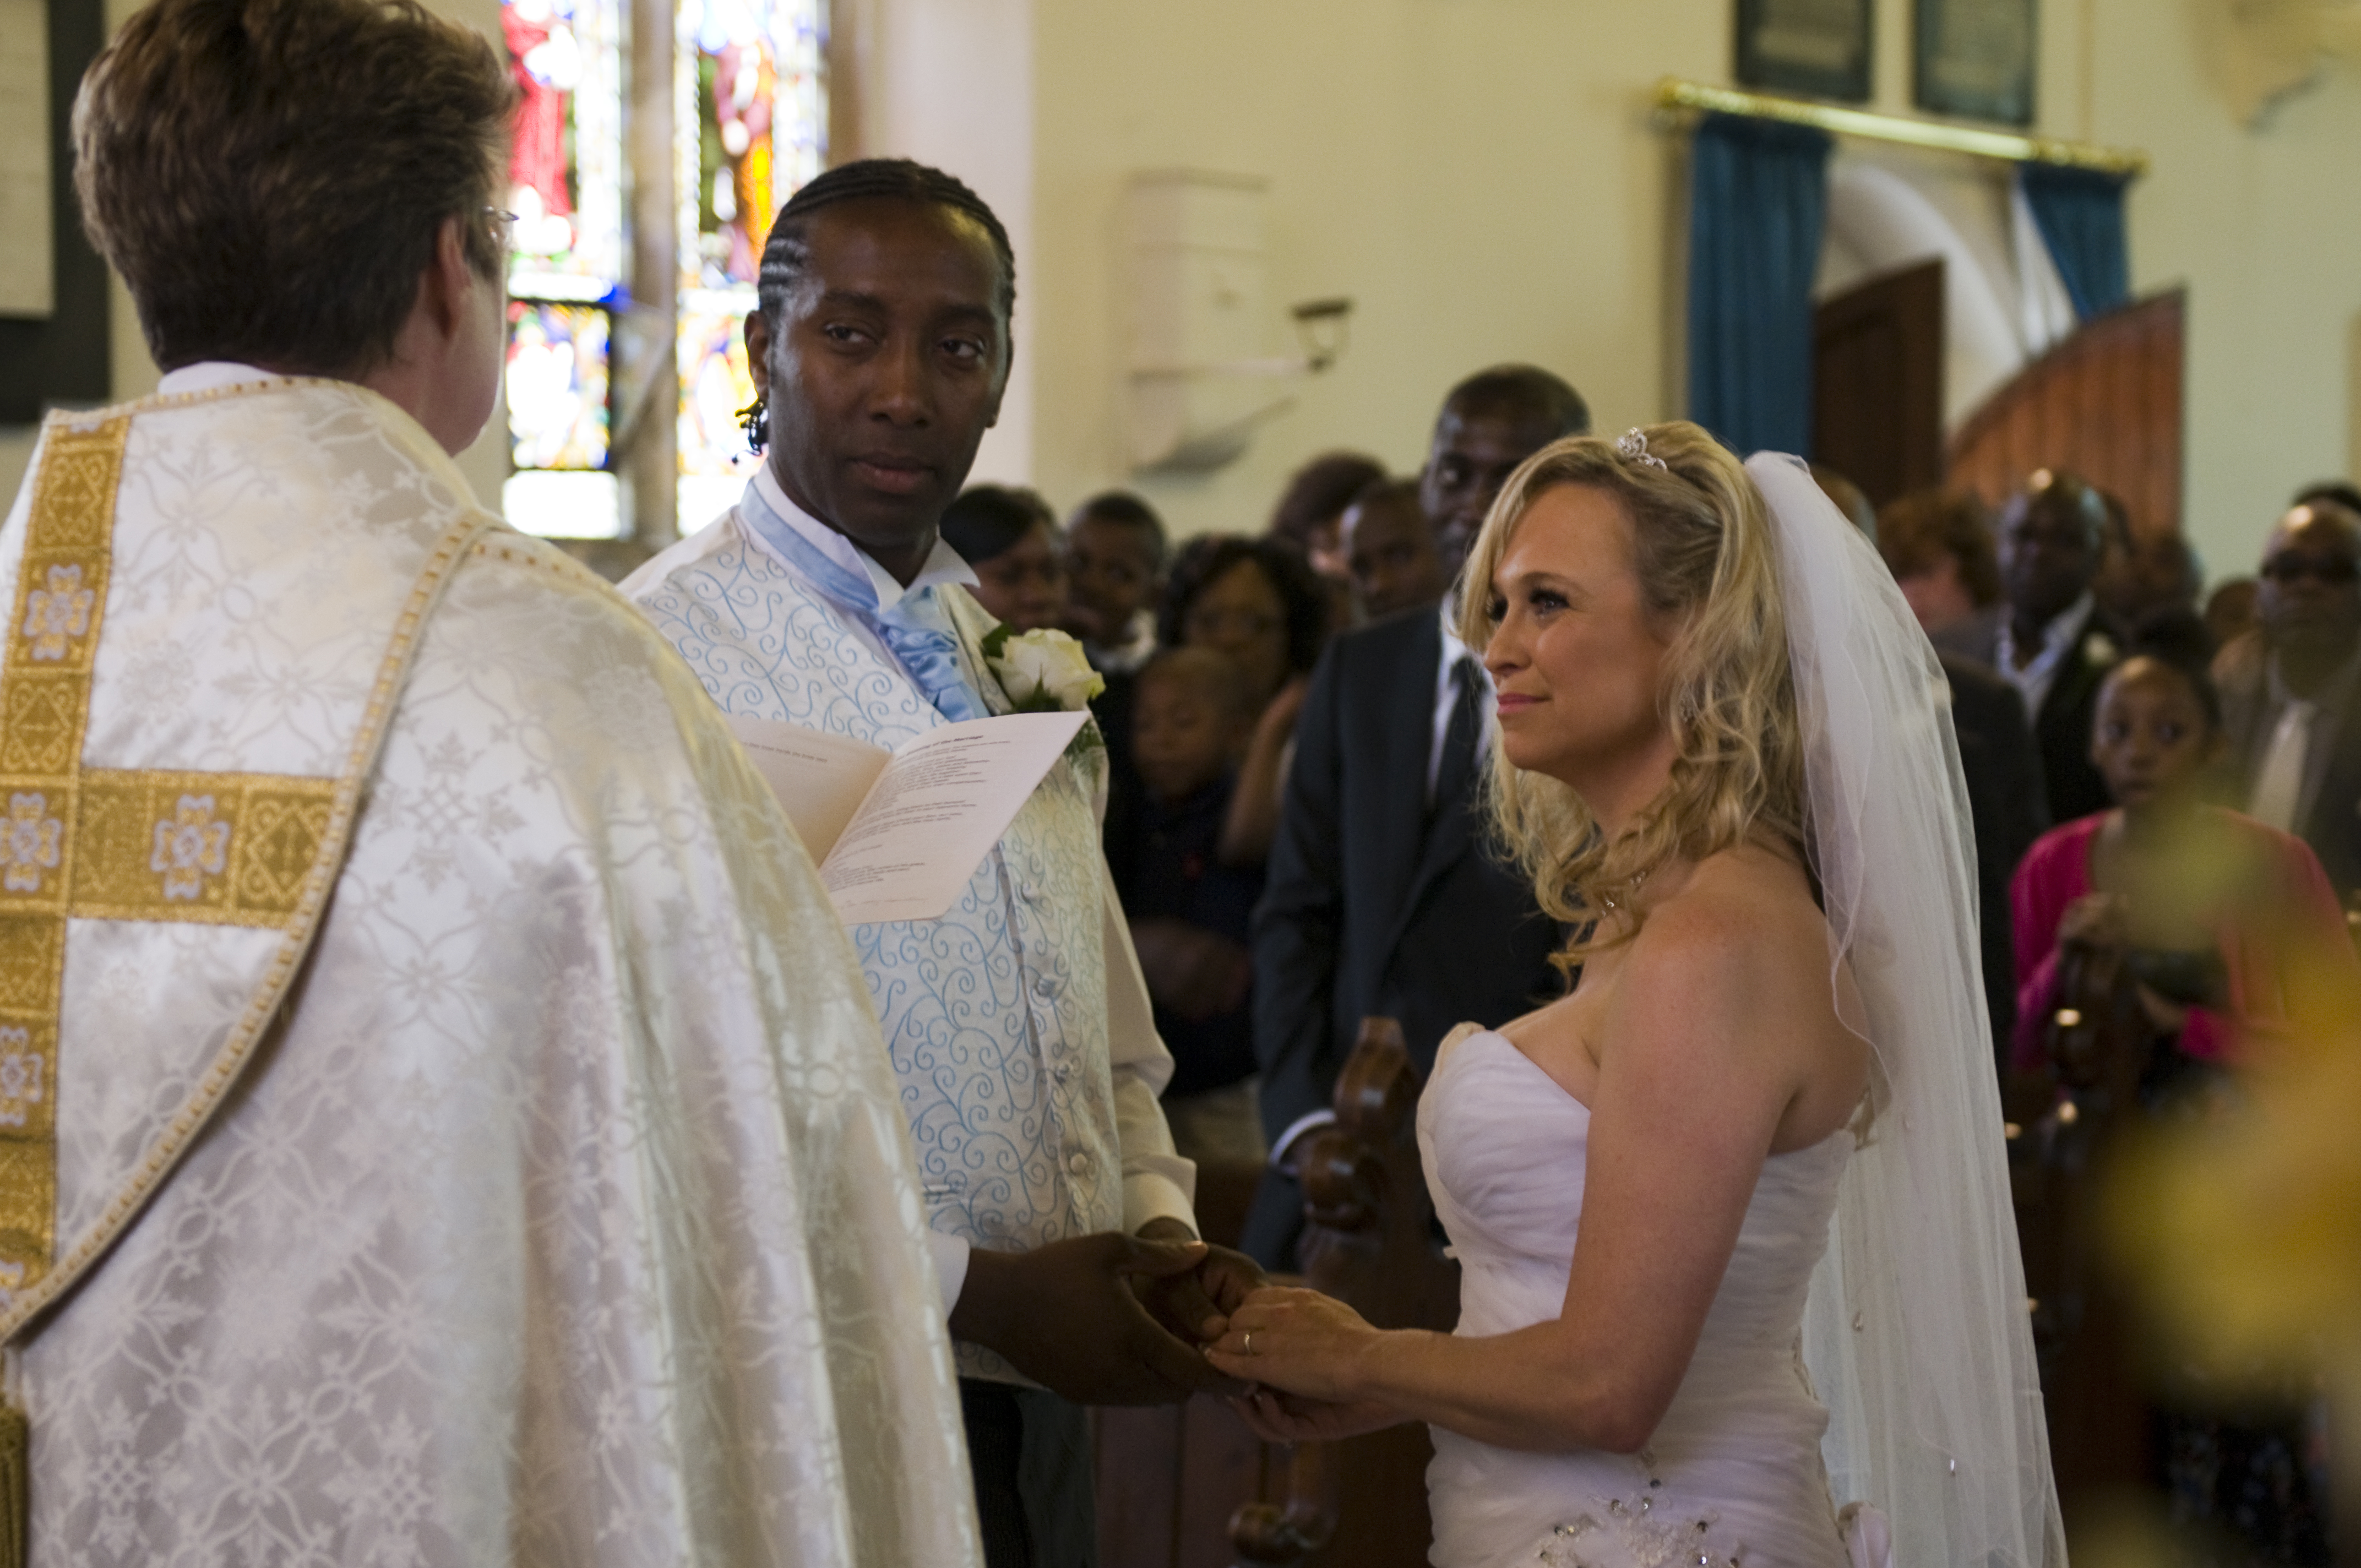 Image of a couple getting married in church